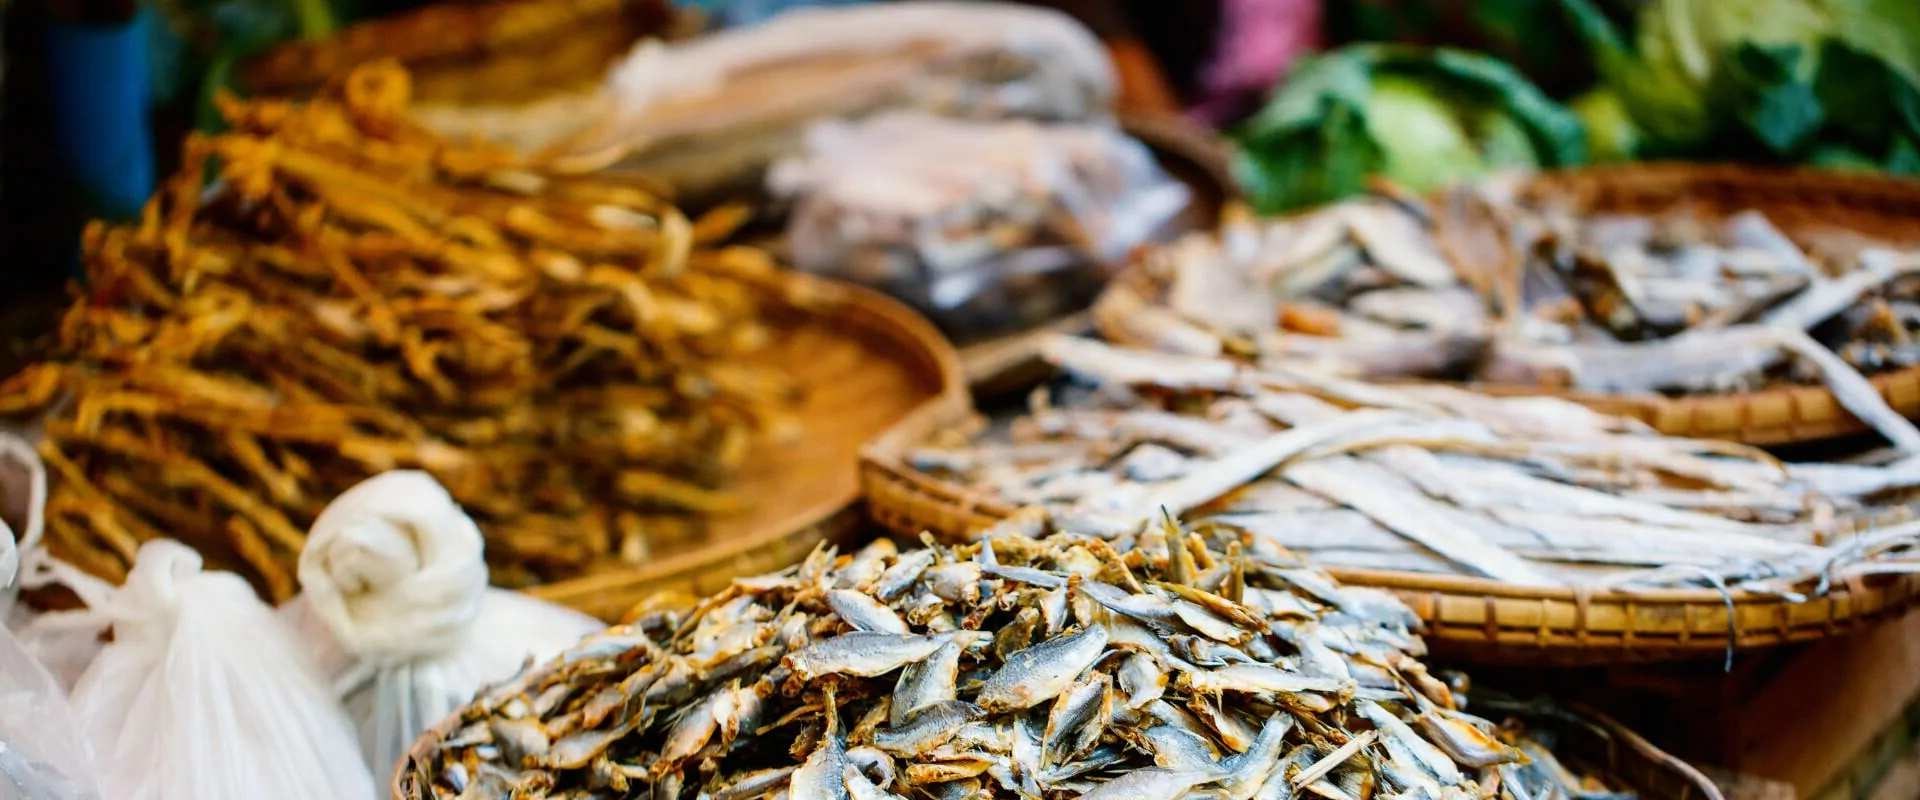 Storage and Shelf Life Considerations for Dried Seafood